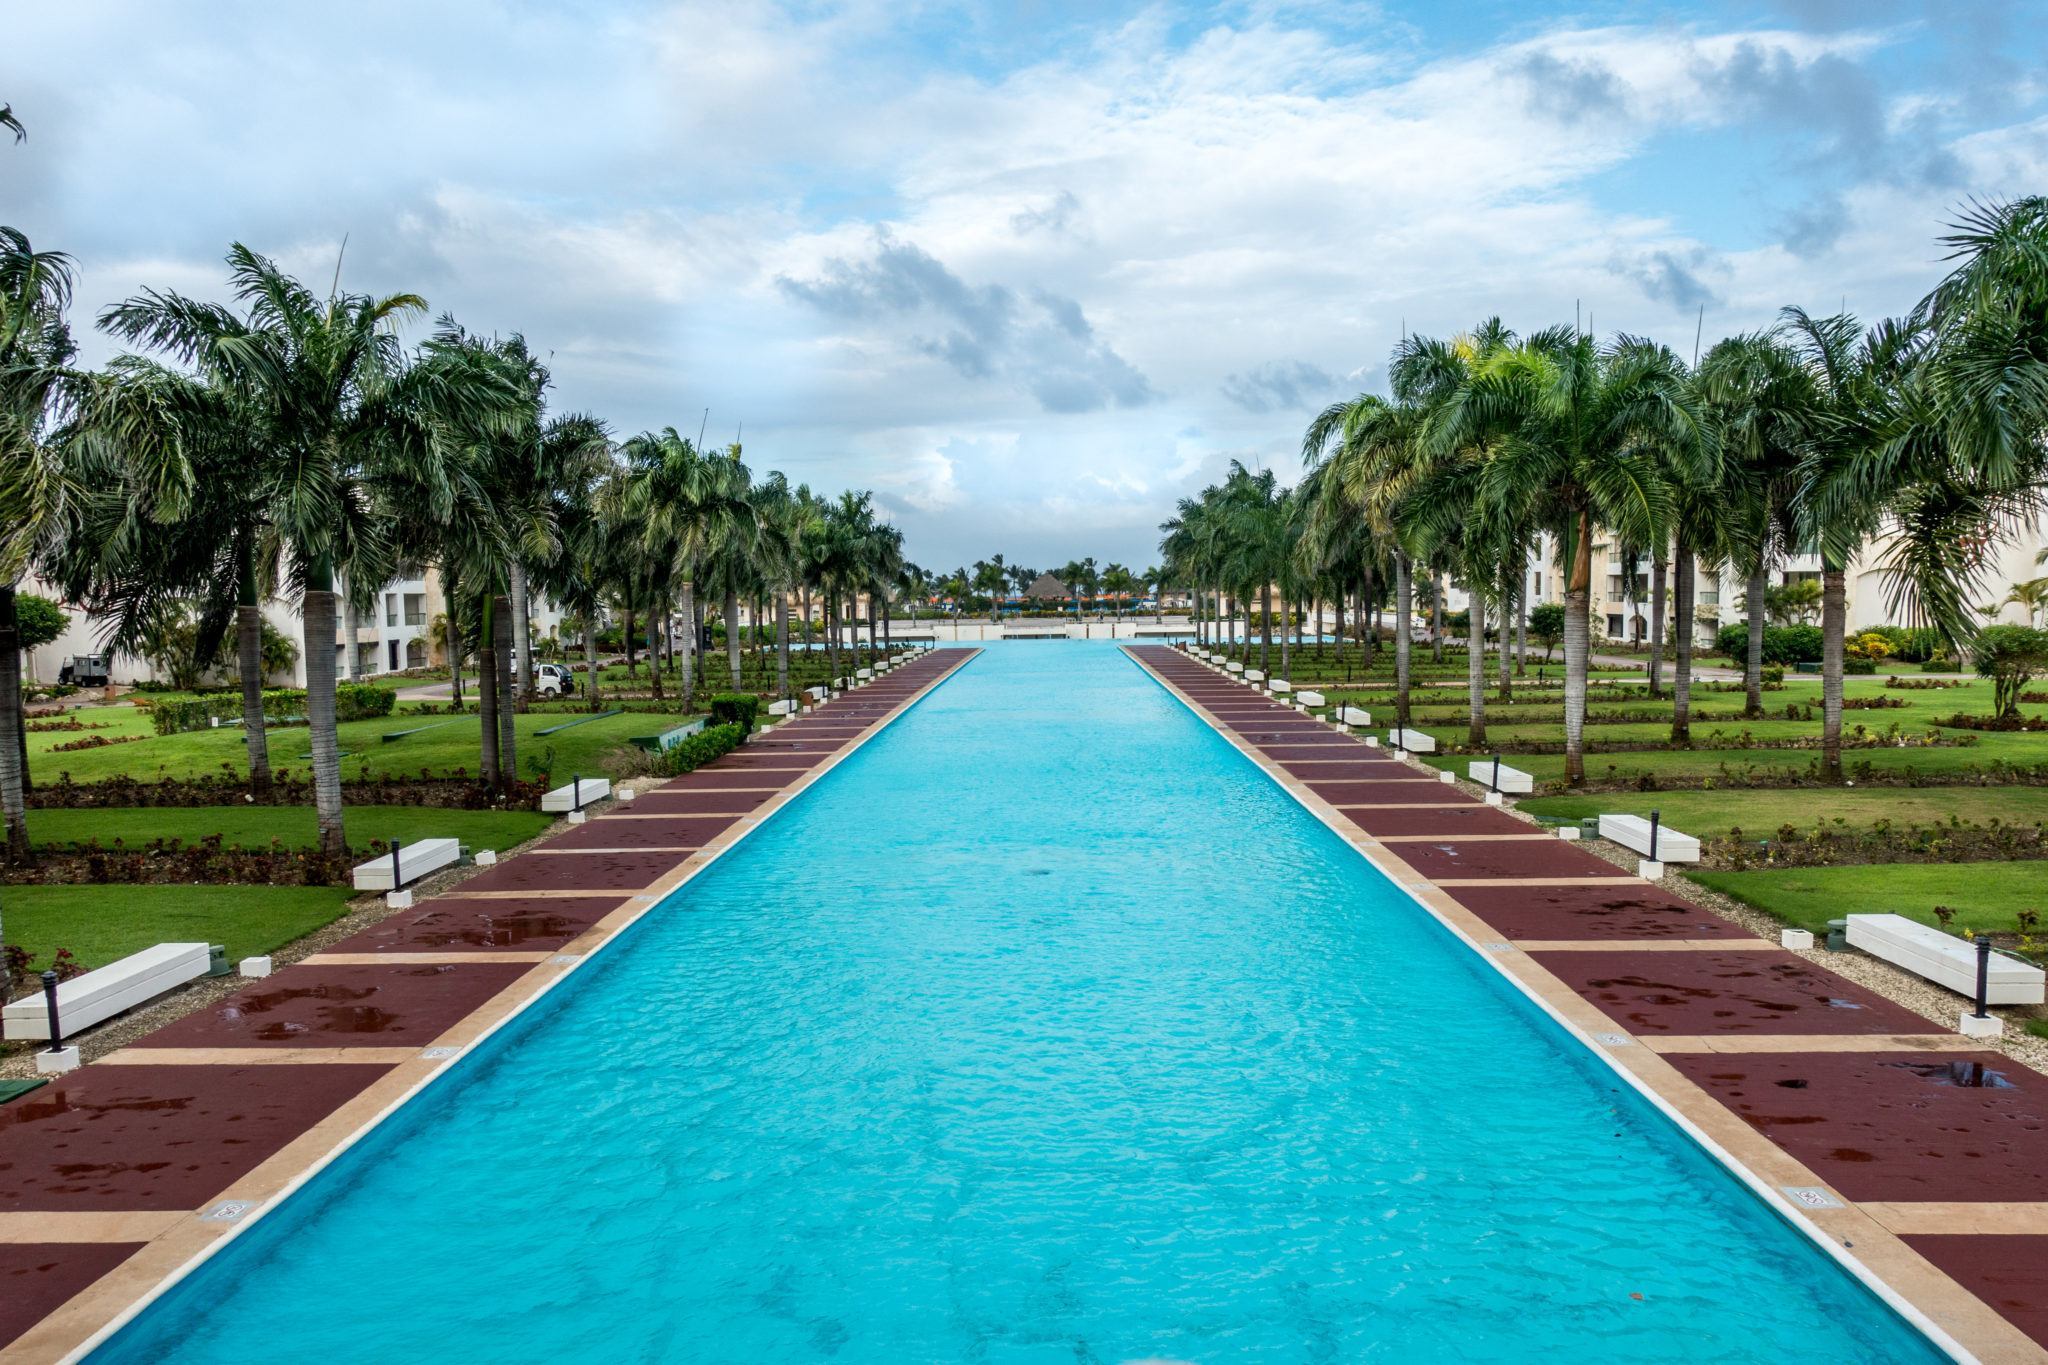 Pool lined with palm trees in Punta Cana Dominican Republic